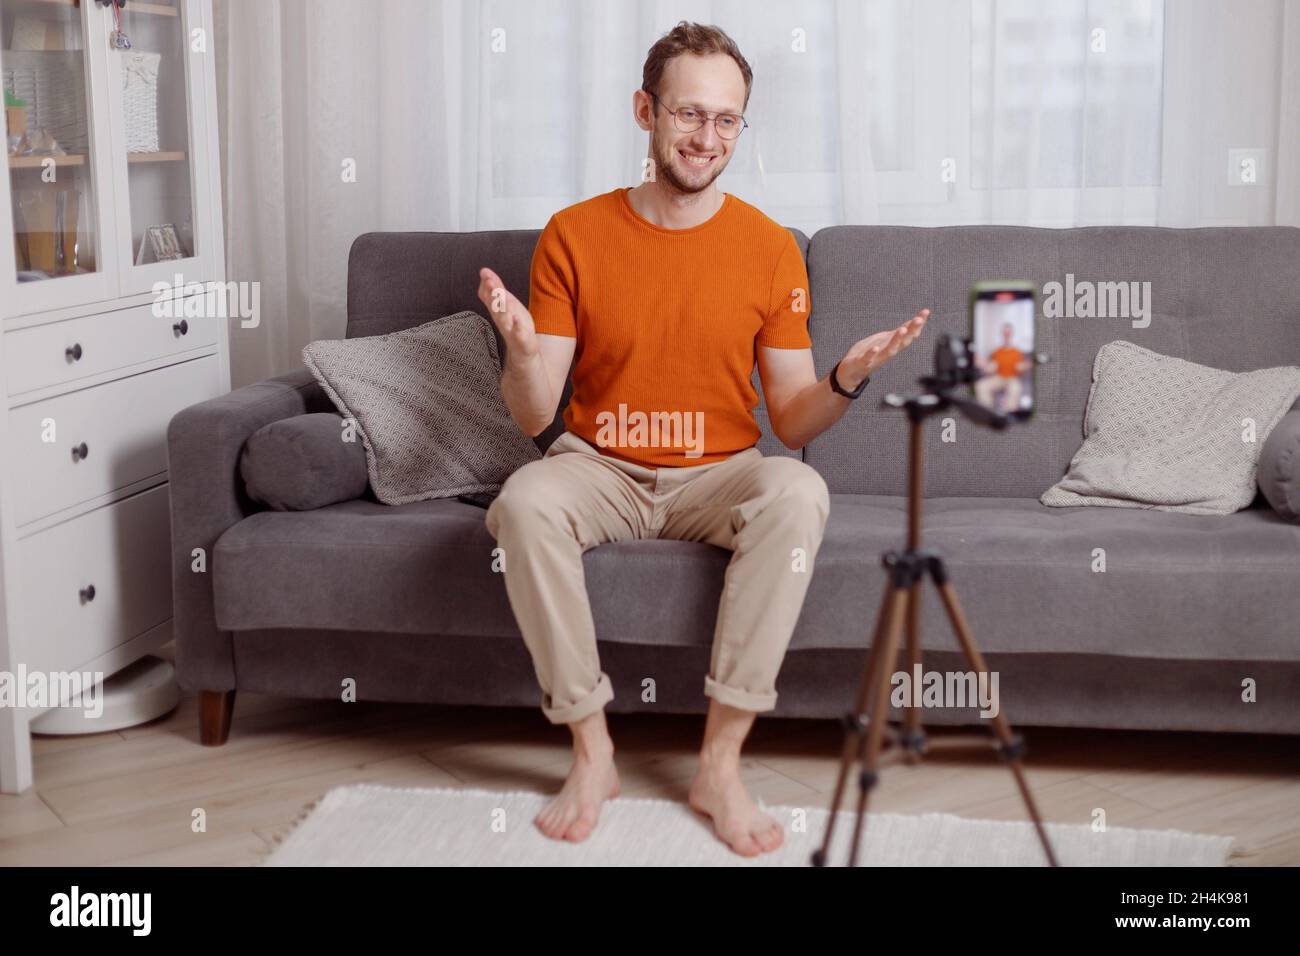 Hipster man blogger recording vlog on mobile phone sit on couch in living room and explain and gesturing with hands. Stock Photo